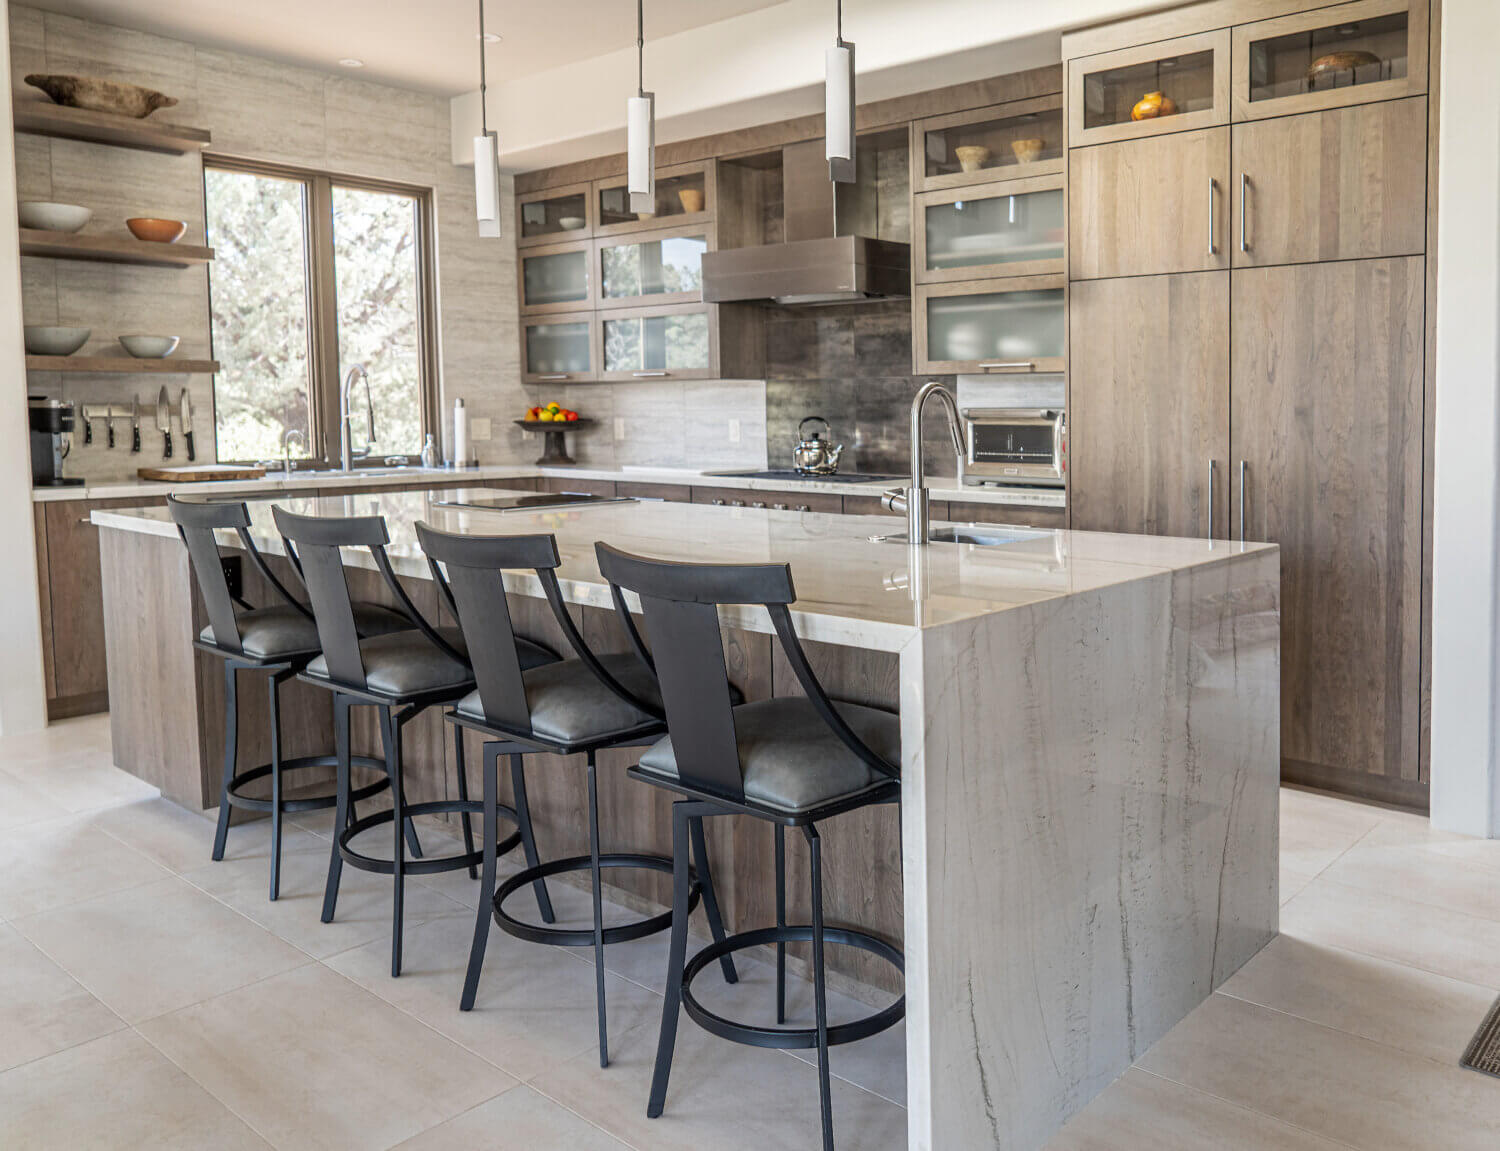 This modern kitchen has a waterfall kitchen island, seating for four, and stunning light gray-brown stained cabinets from Dura Supreme.